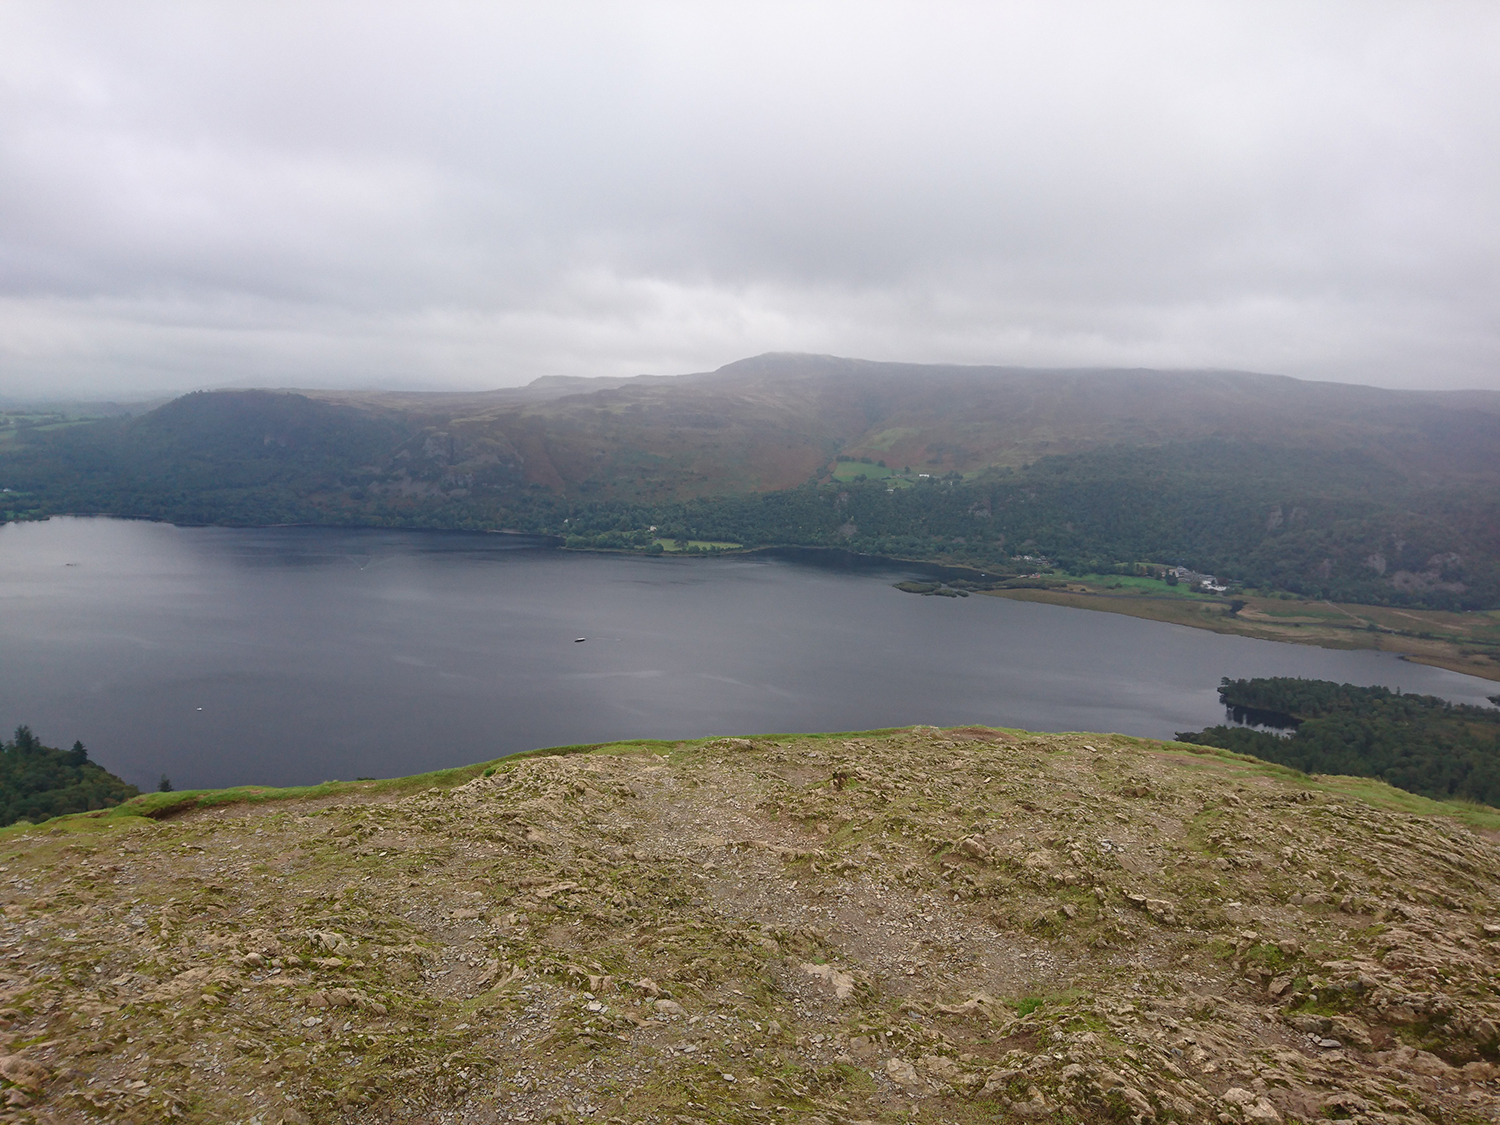 The view from Catbells summit